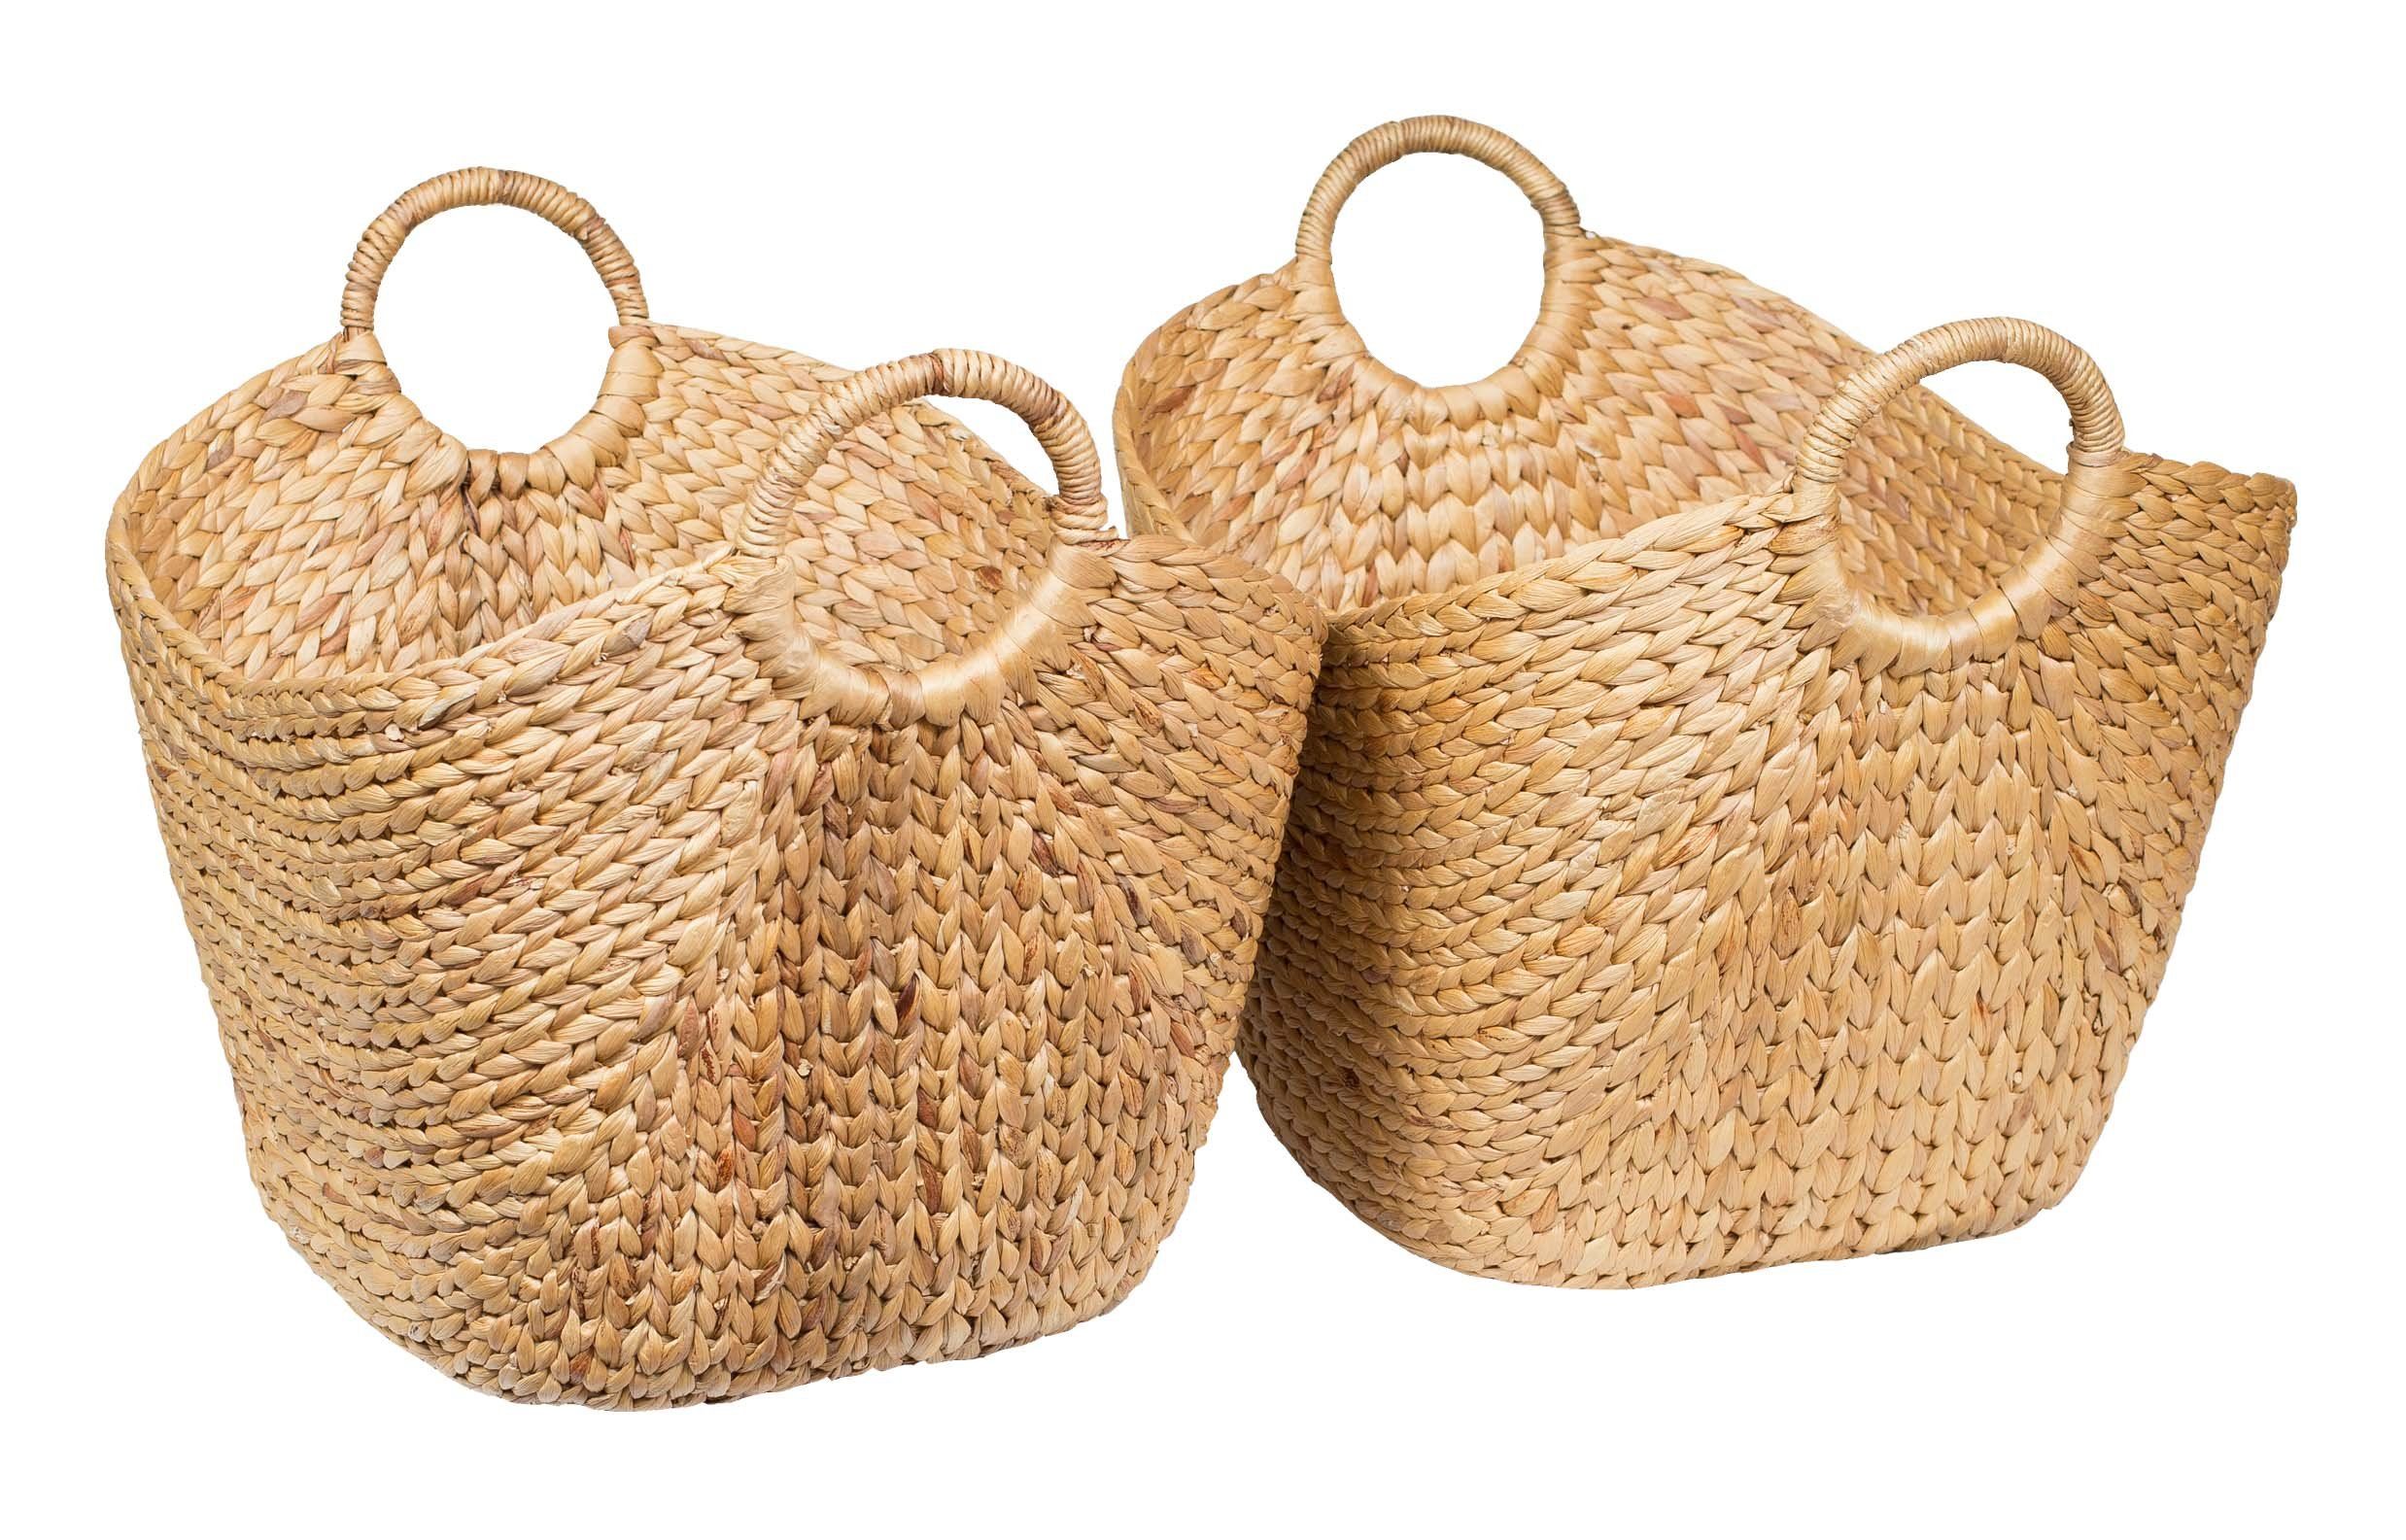 BIRDROCK HOME Water Hyacinth Laundry Baskets (Natural) - Two Baskets Included - Hand Woven | Amazon (US)